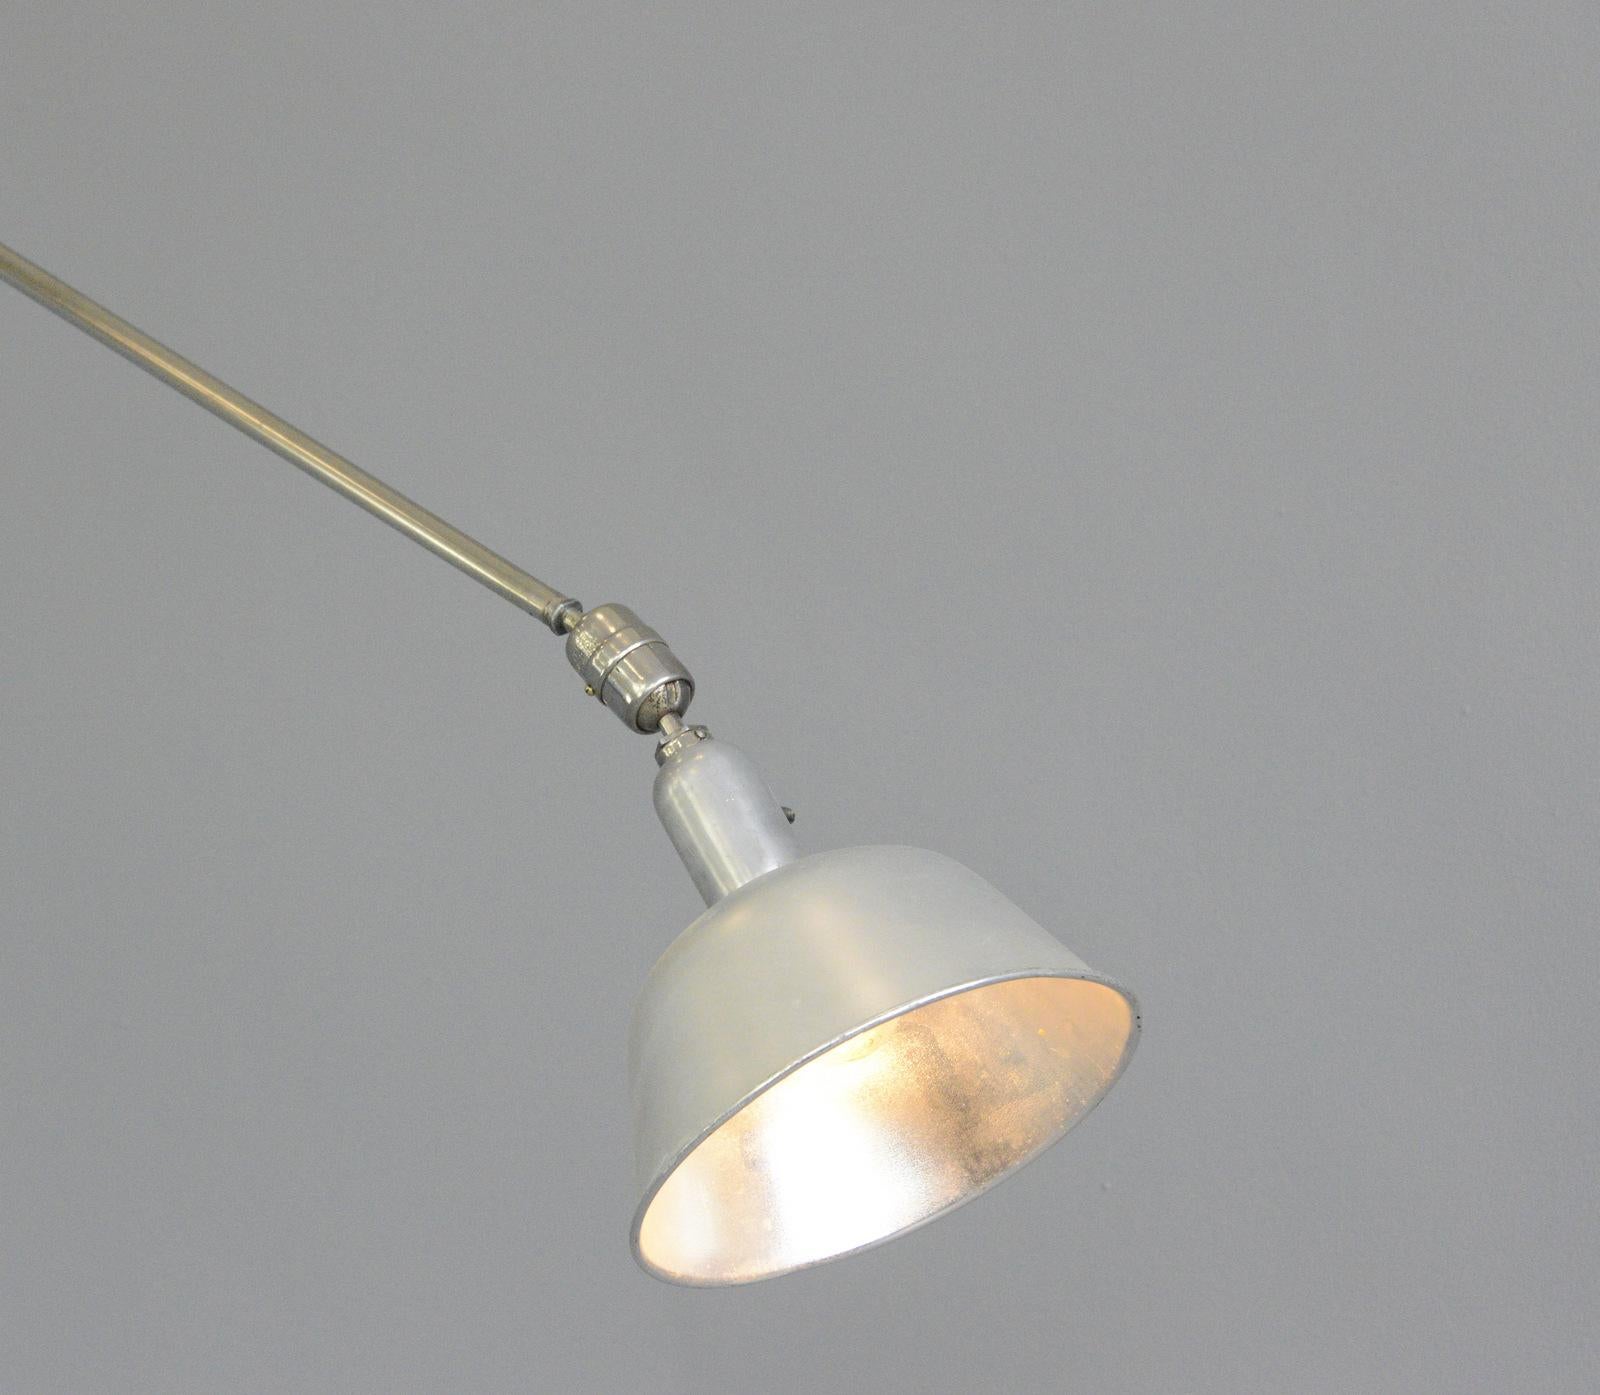 Telescopic task lamp by Johan Petter Johansson for Triplex, 1920s

- Aluminium shade
- Telescopic arms
- The shade detaches from the arm to create a pendant
- Brushed steel
- Original On/Off toggle switch on the shade
- Made by ASEA under the